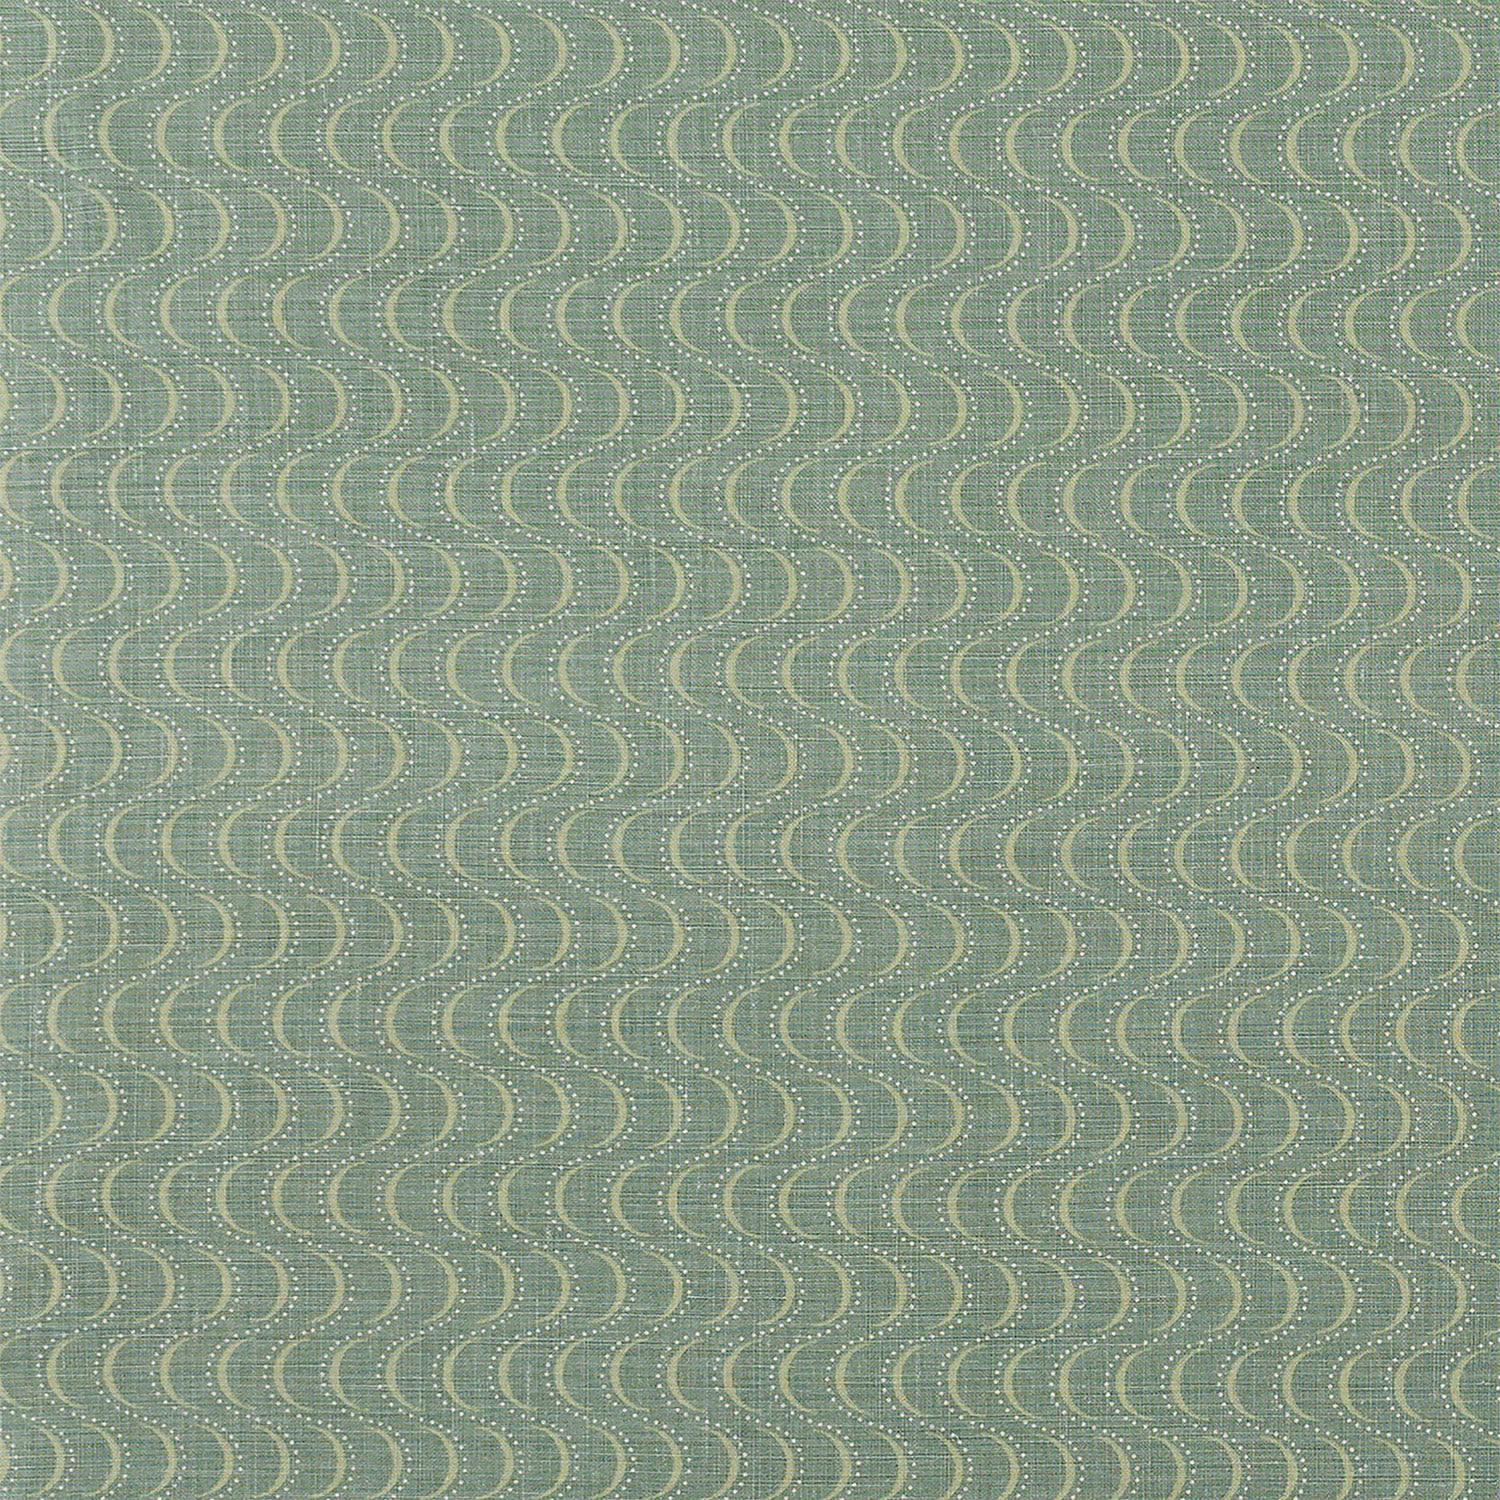 Fabric in an undulating stripe pattern in light green and white on a green field.